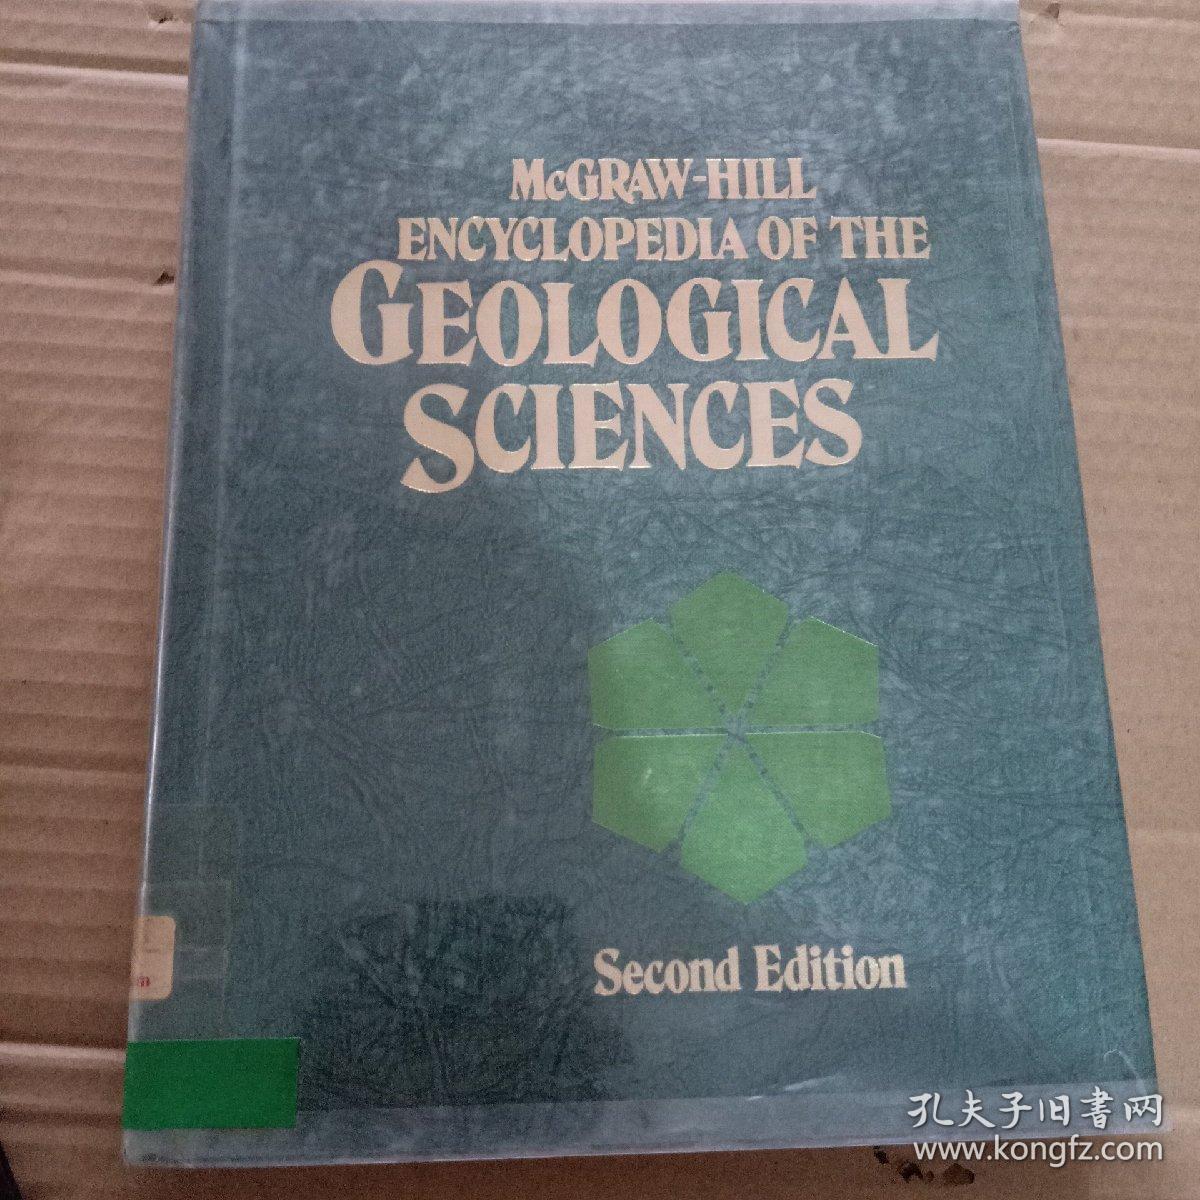 MCGRAW-HILL ENCYCLOPEDIA OF THE GEOLOGICAL SOIENCES